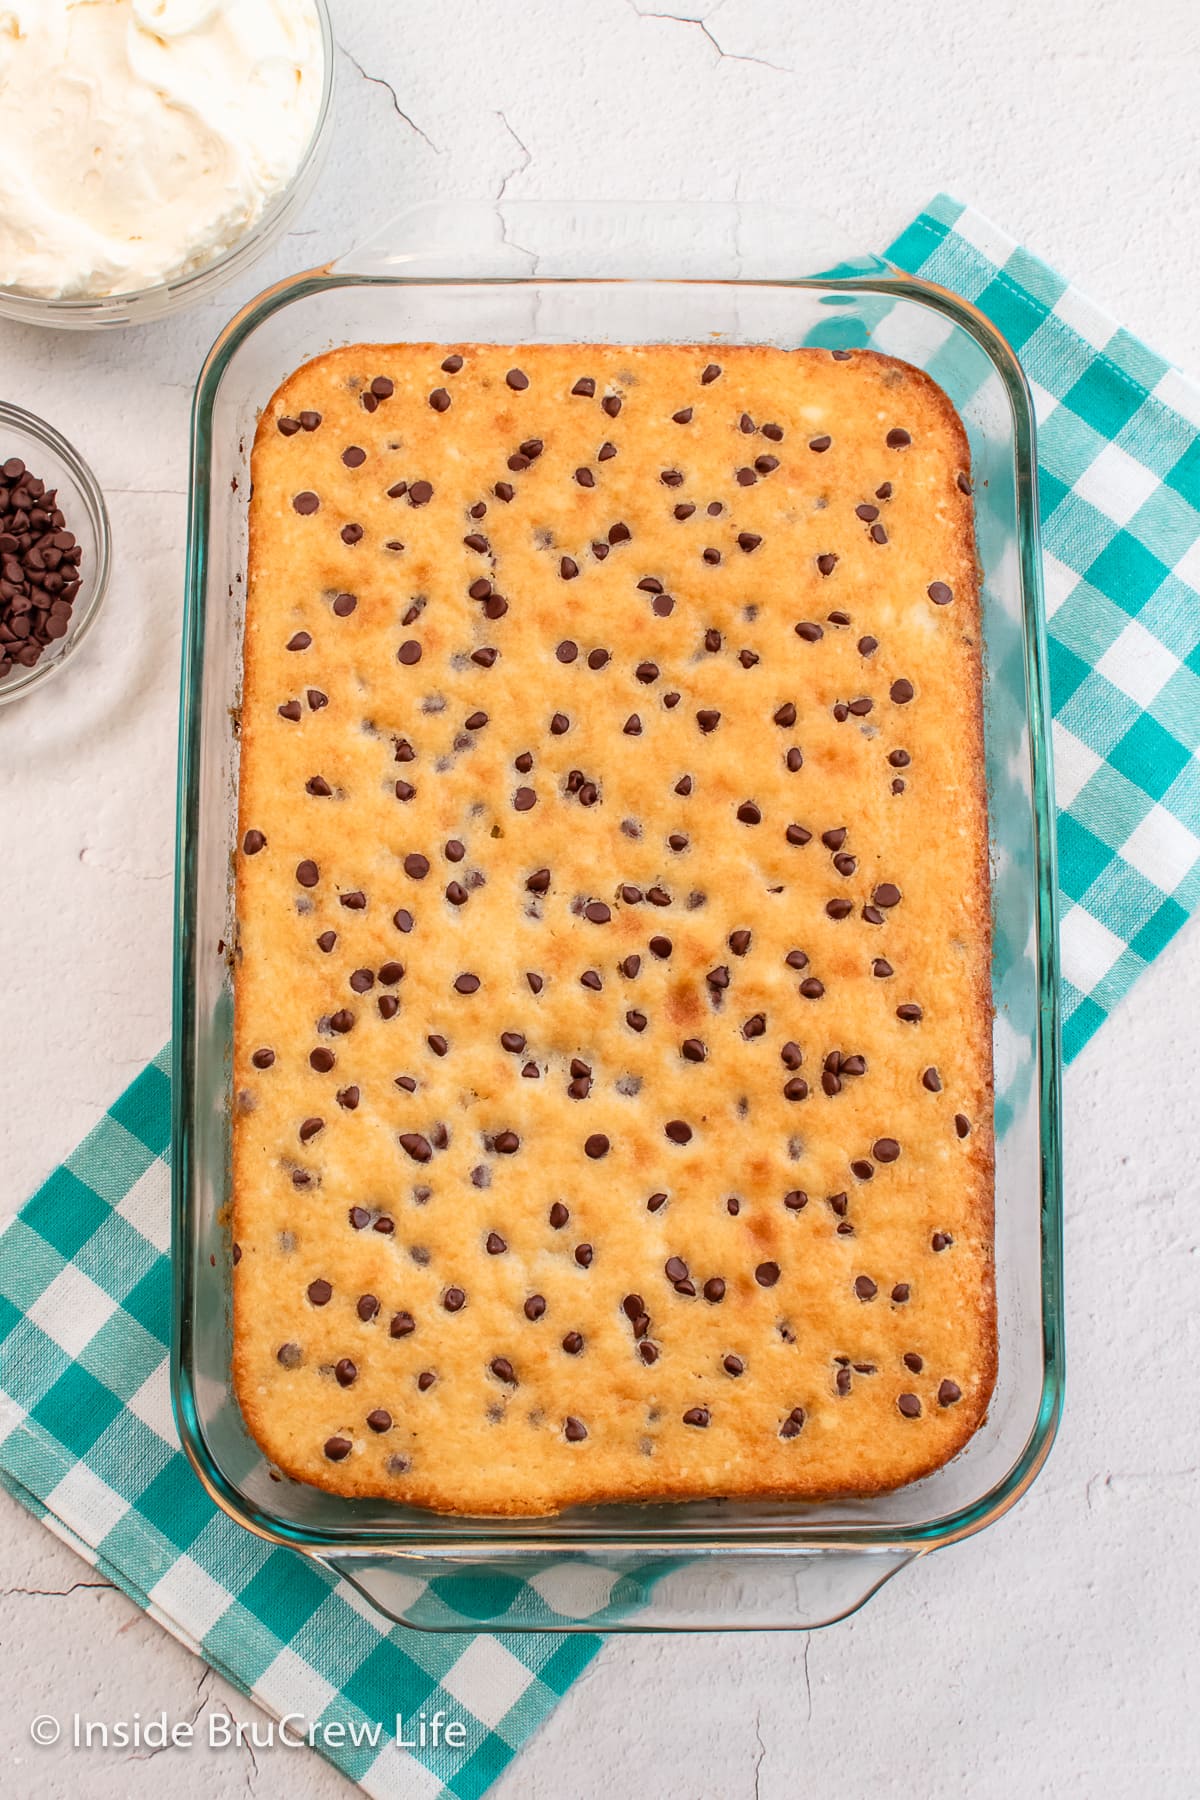 A finished cake topped with chocolate chips.